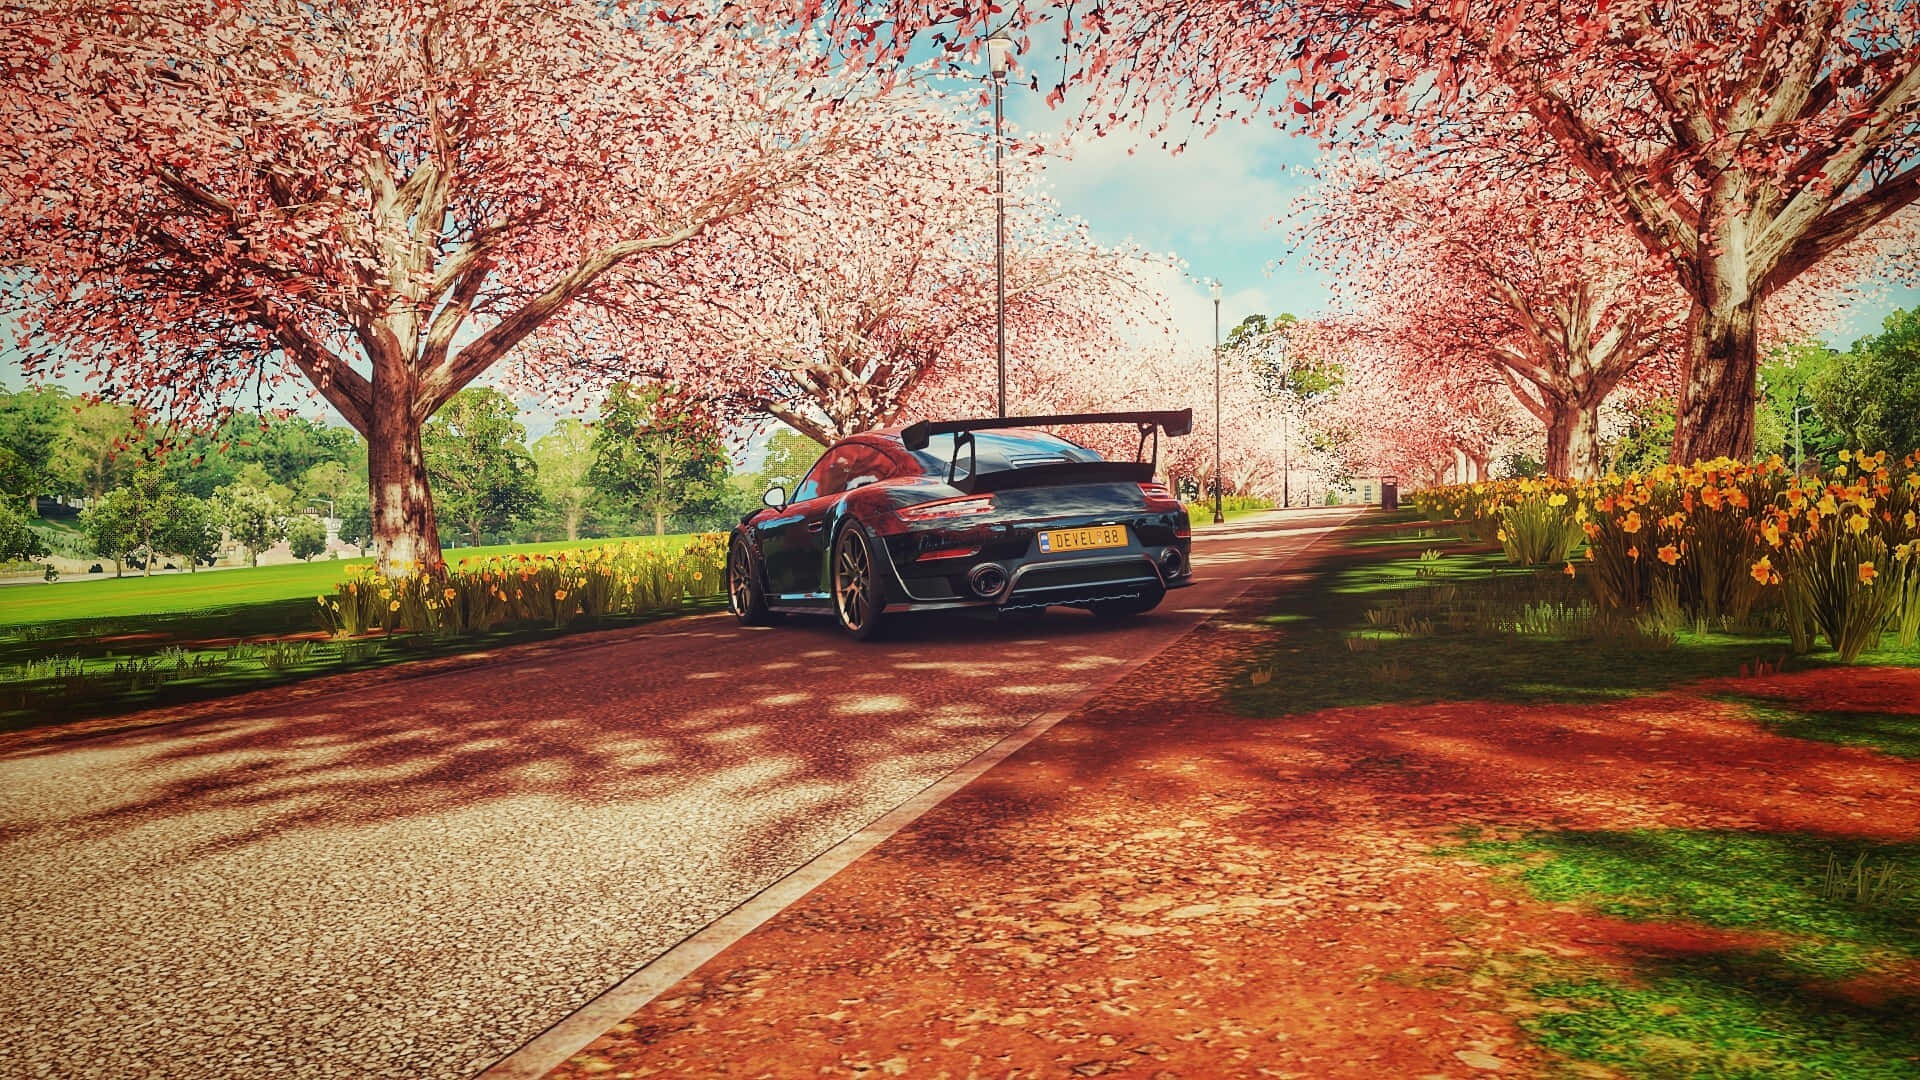 Explore the Streets of Great Britain in HD Forza Horizon 4